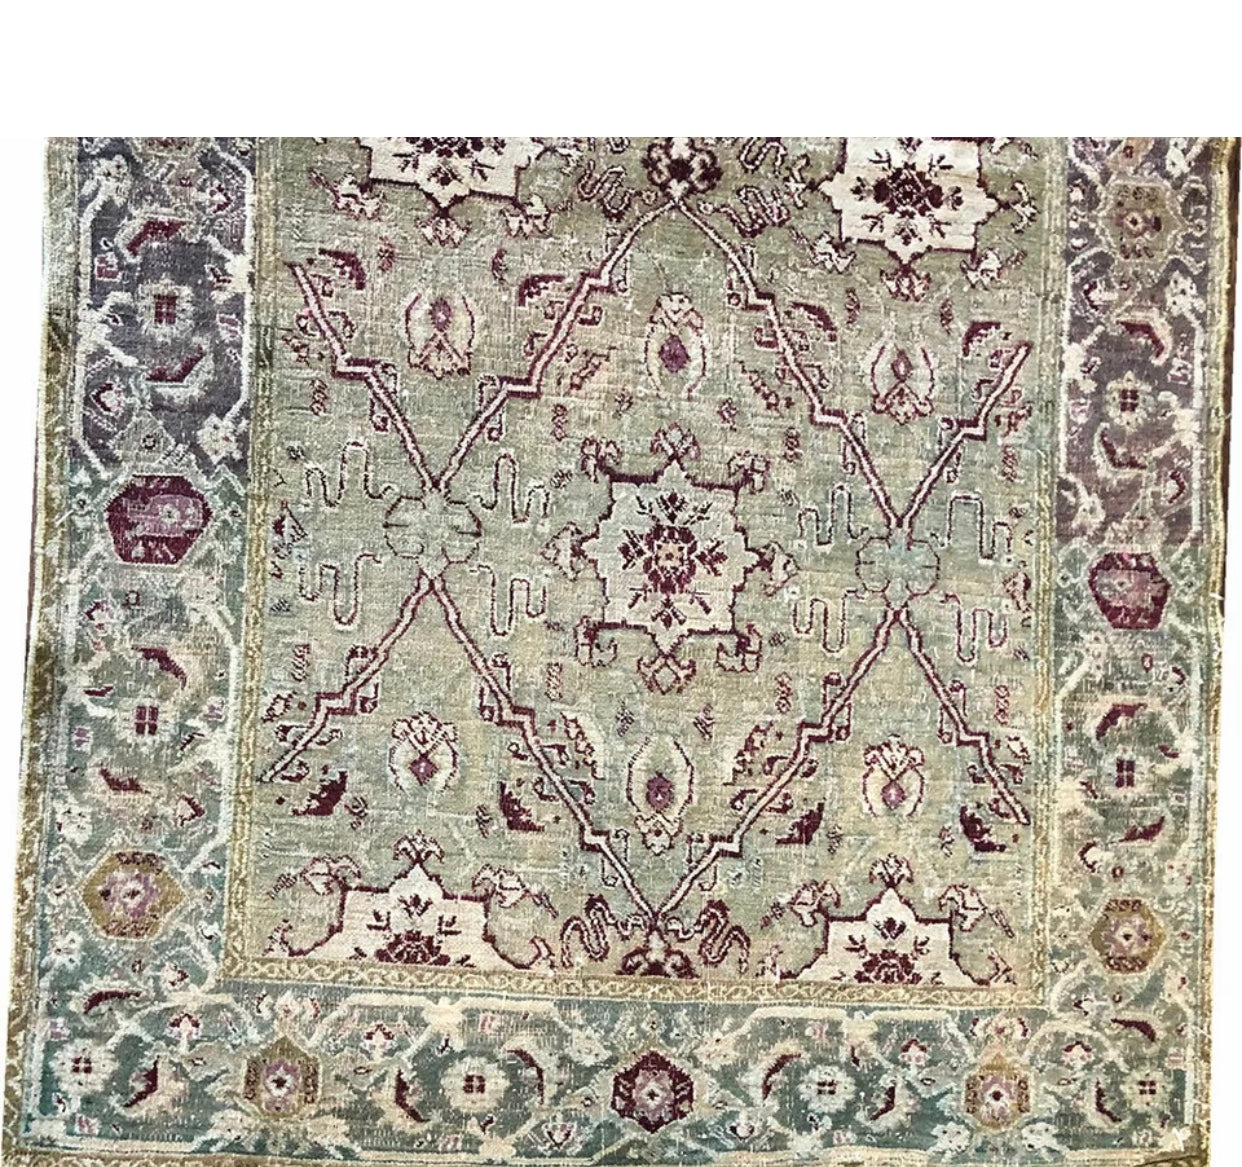 A 19th Century Indian Agra Rug “Prison Weave”